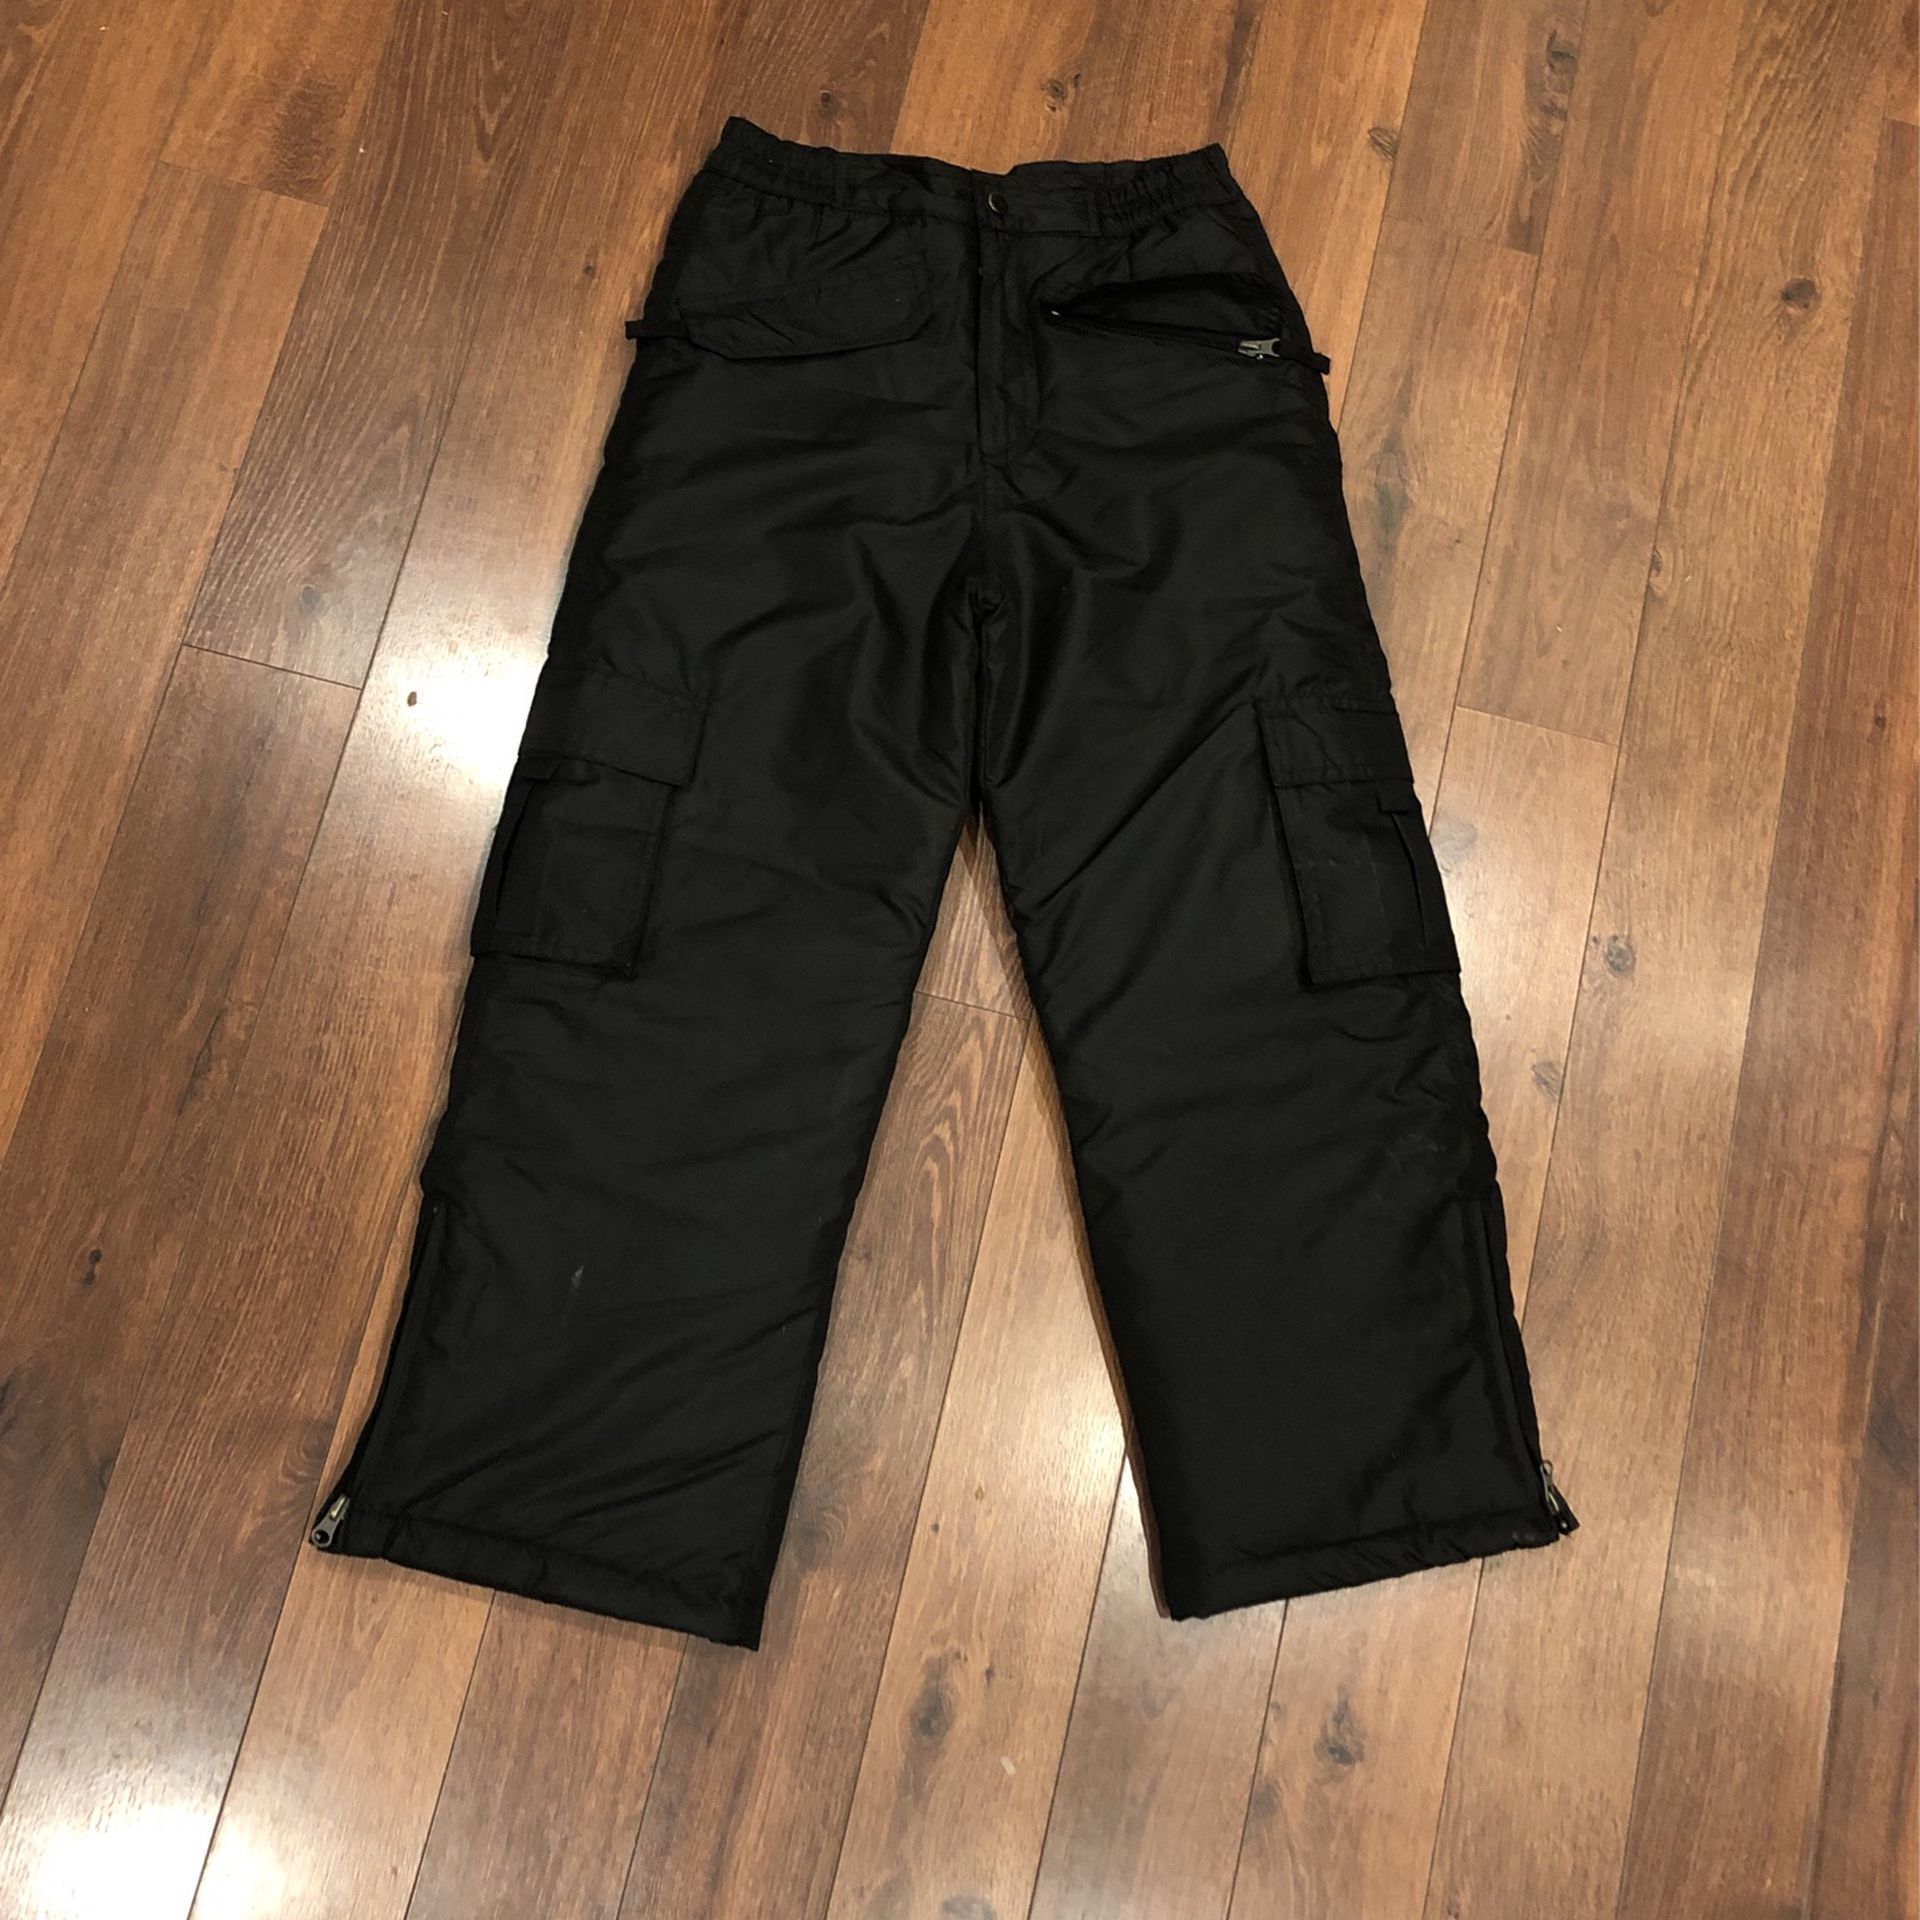 Kids Snow Pants Size 7/8 Like New - Boots, Coats Also For Sale